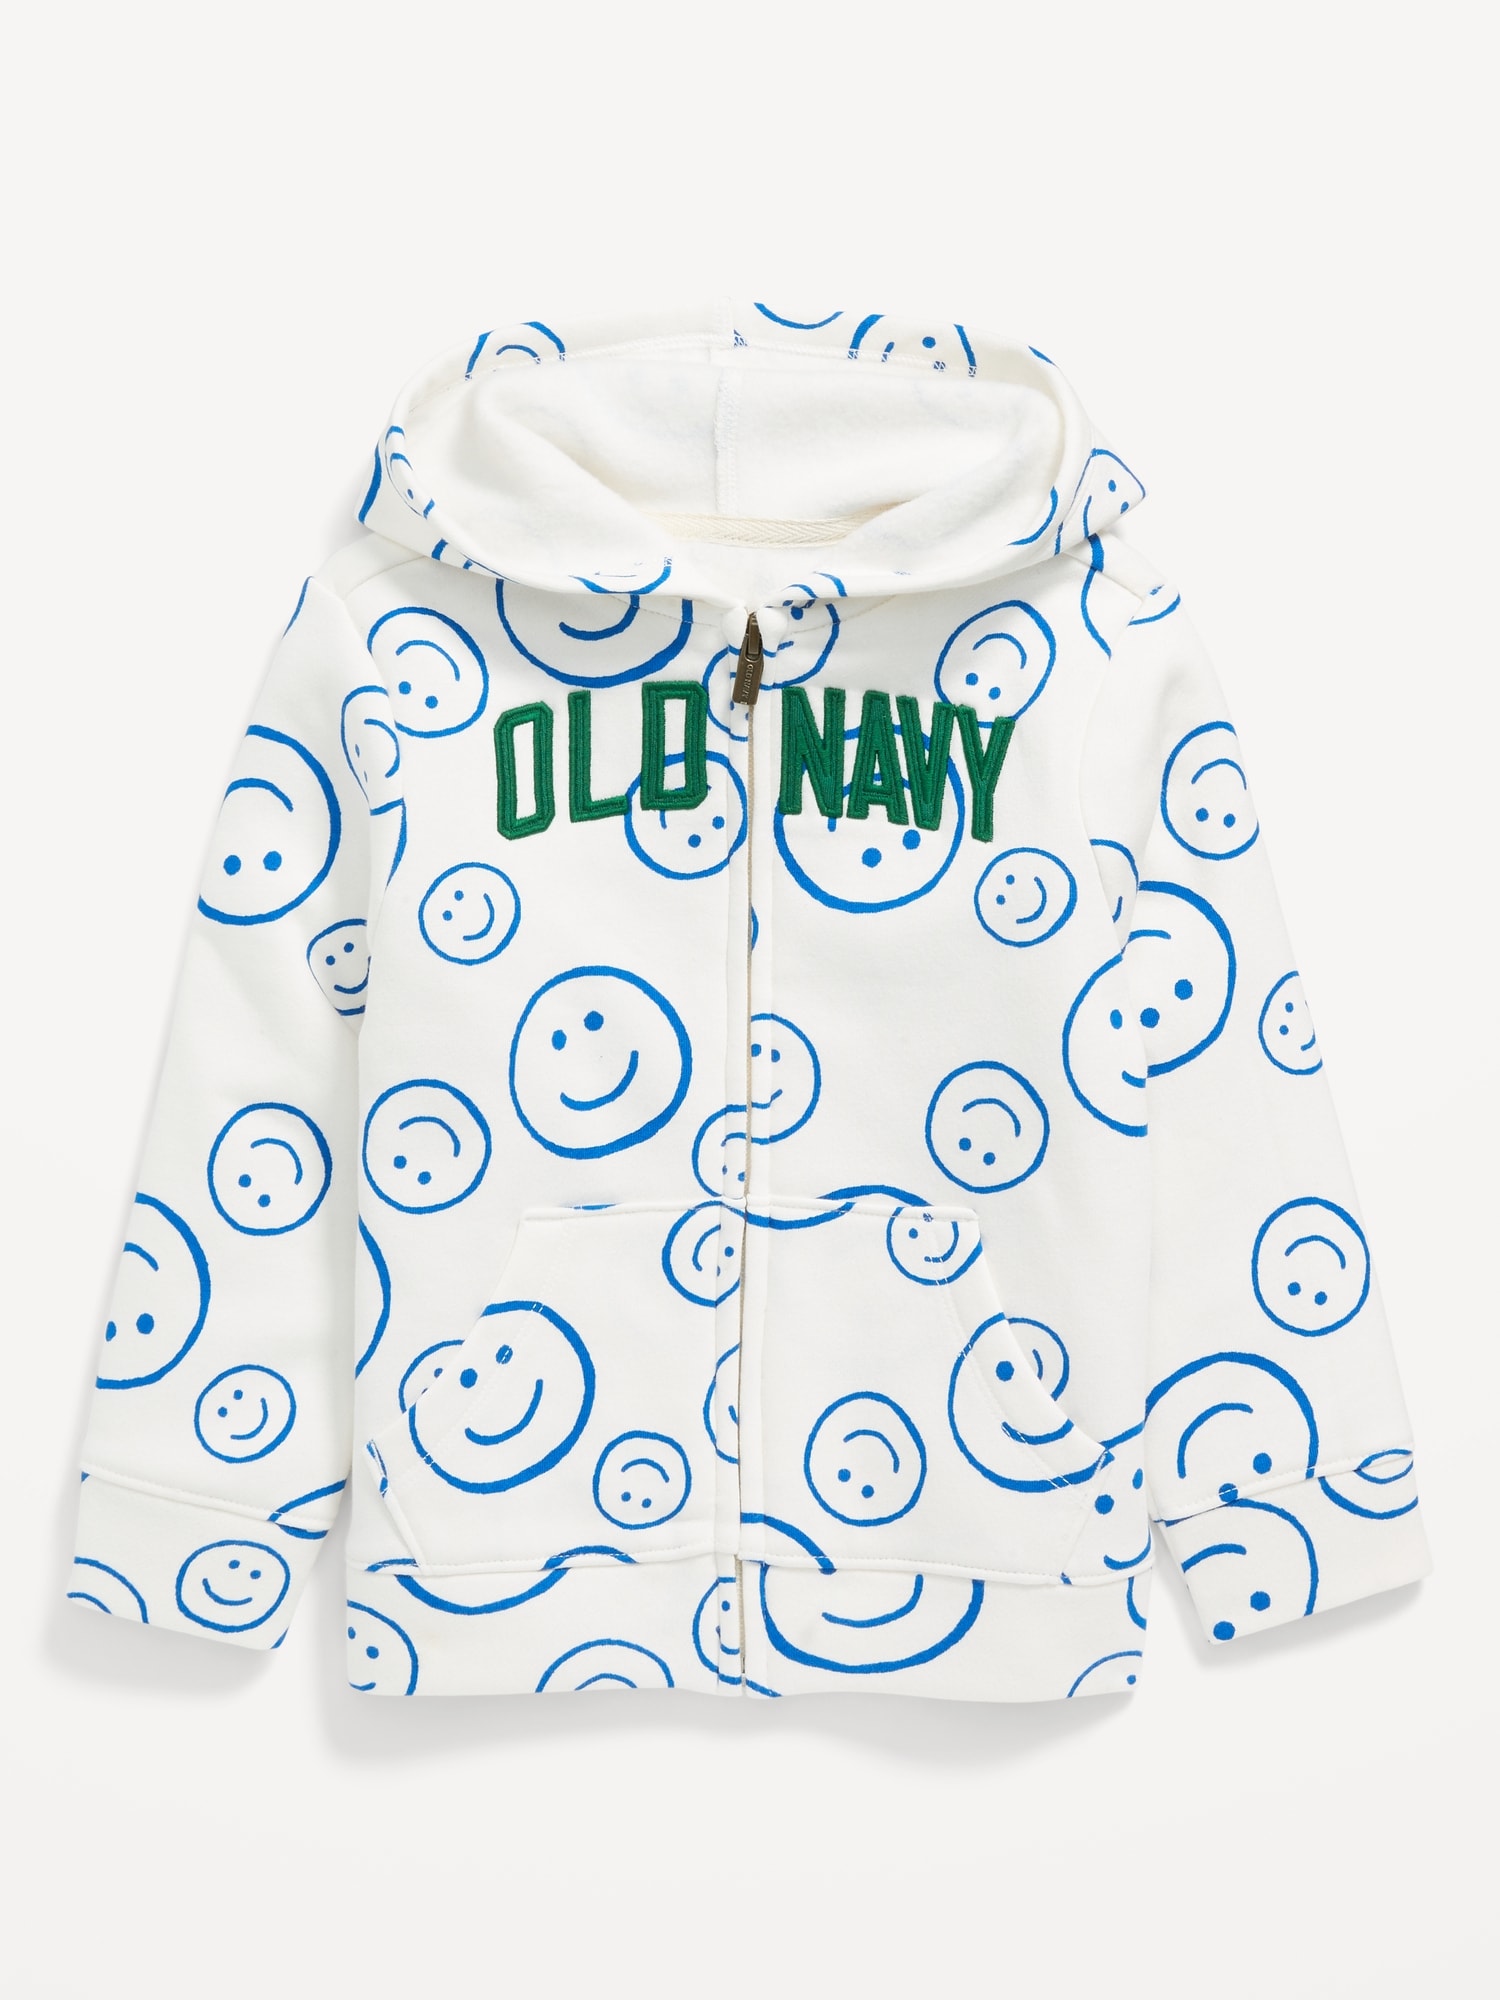 Logo-Graphic Zip-Front Hoodie for Toddler Boys